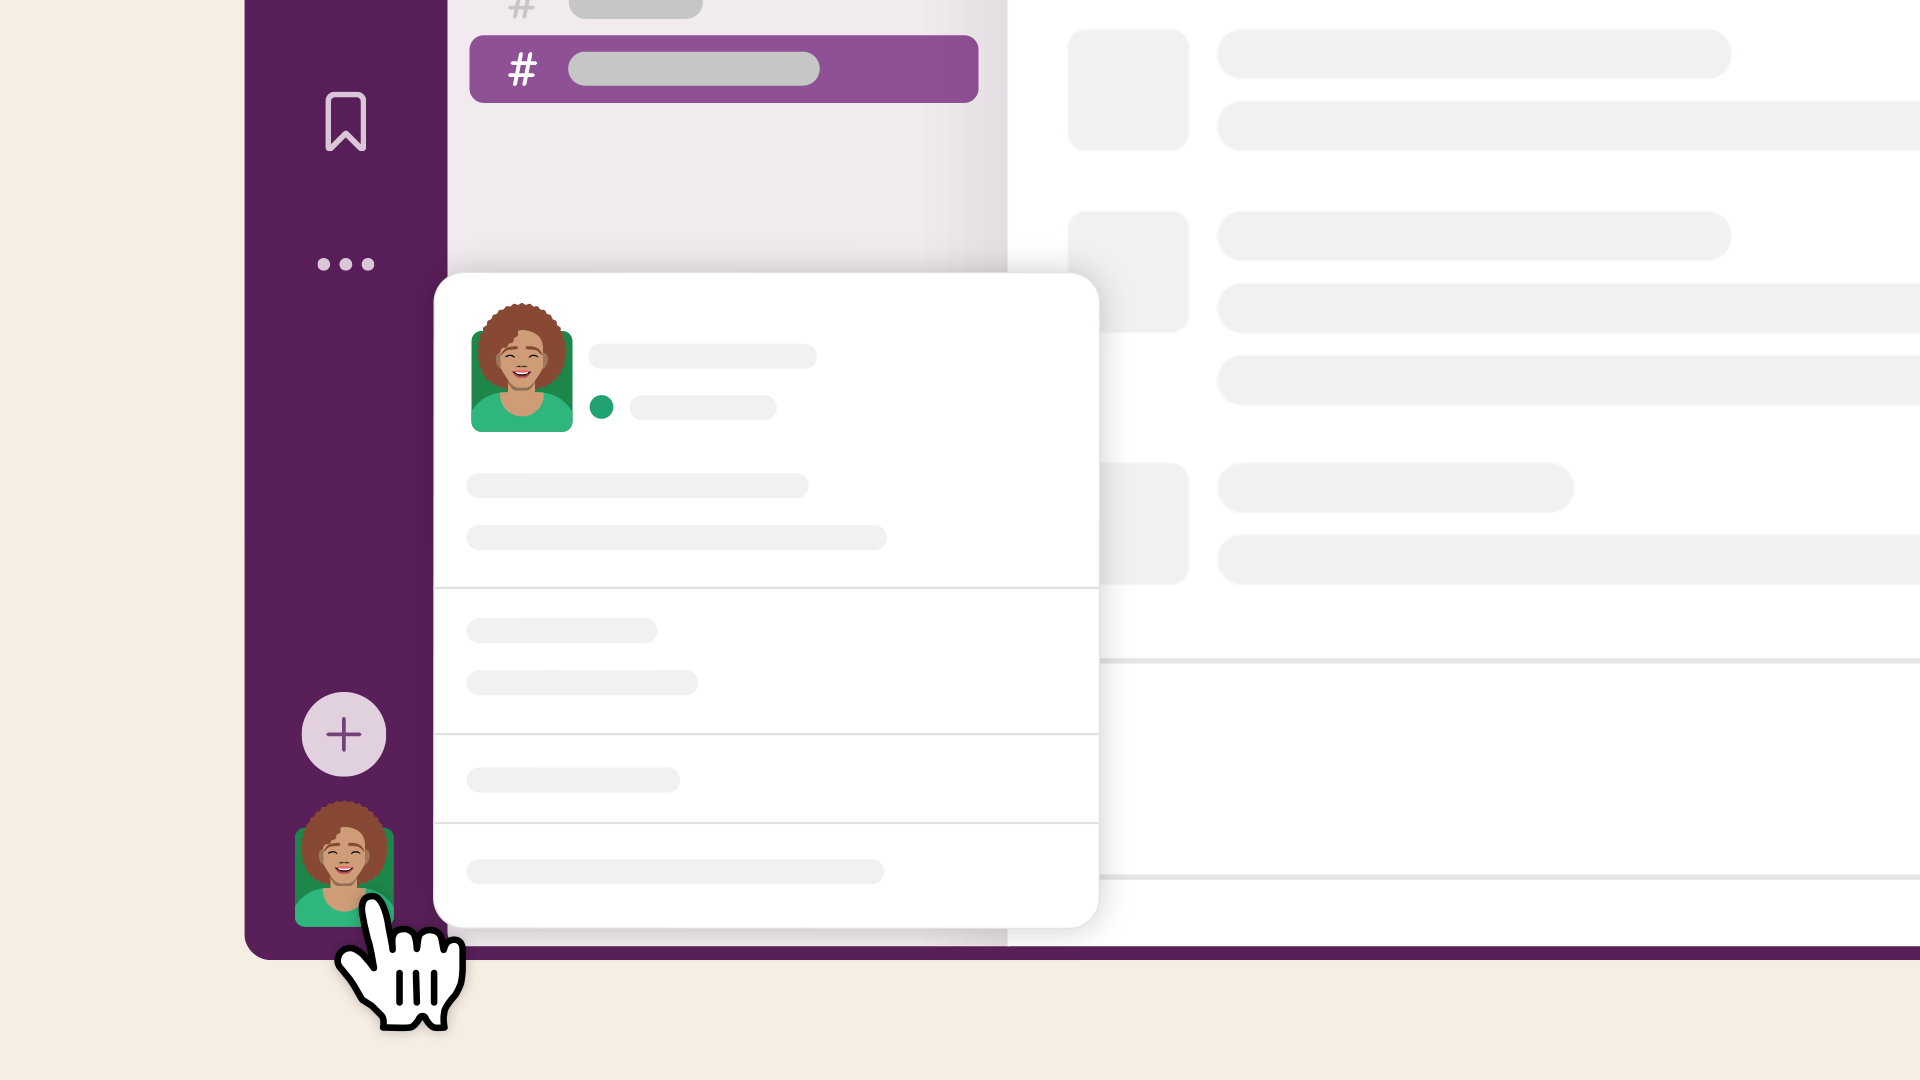 Static image of a cursor clicking the profile picture menu in the Slack app